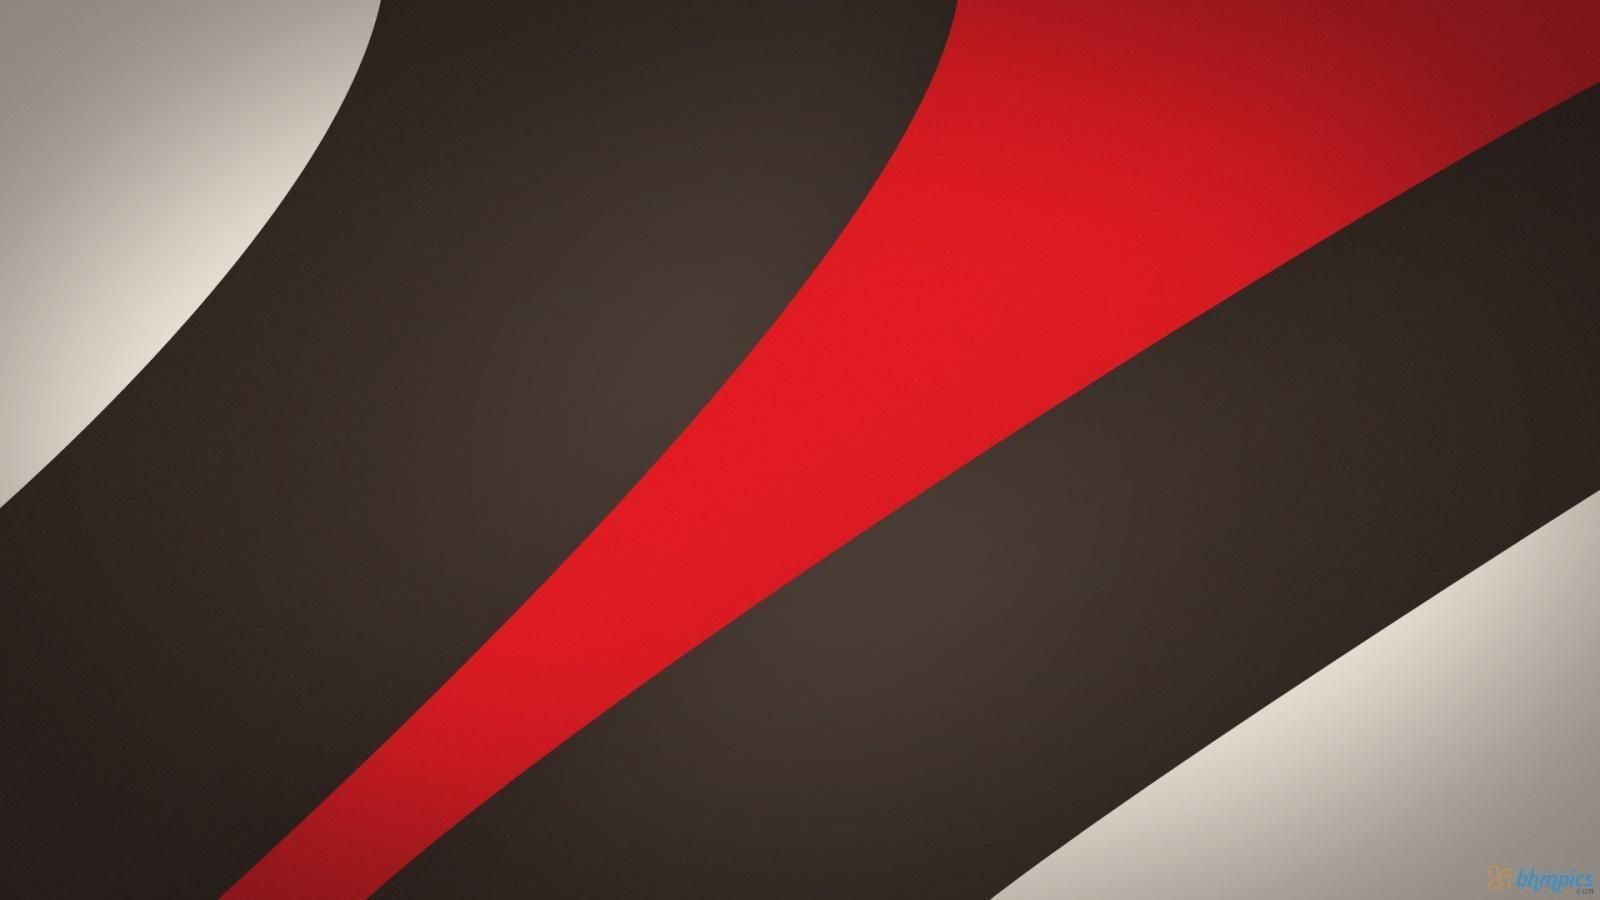 Abstract Red Black Lines Free PPT Background for your PowerPoint